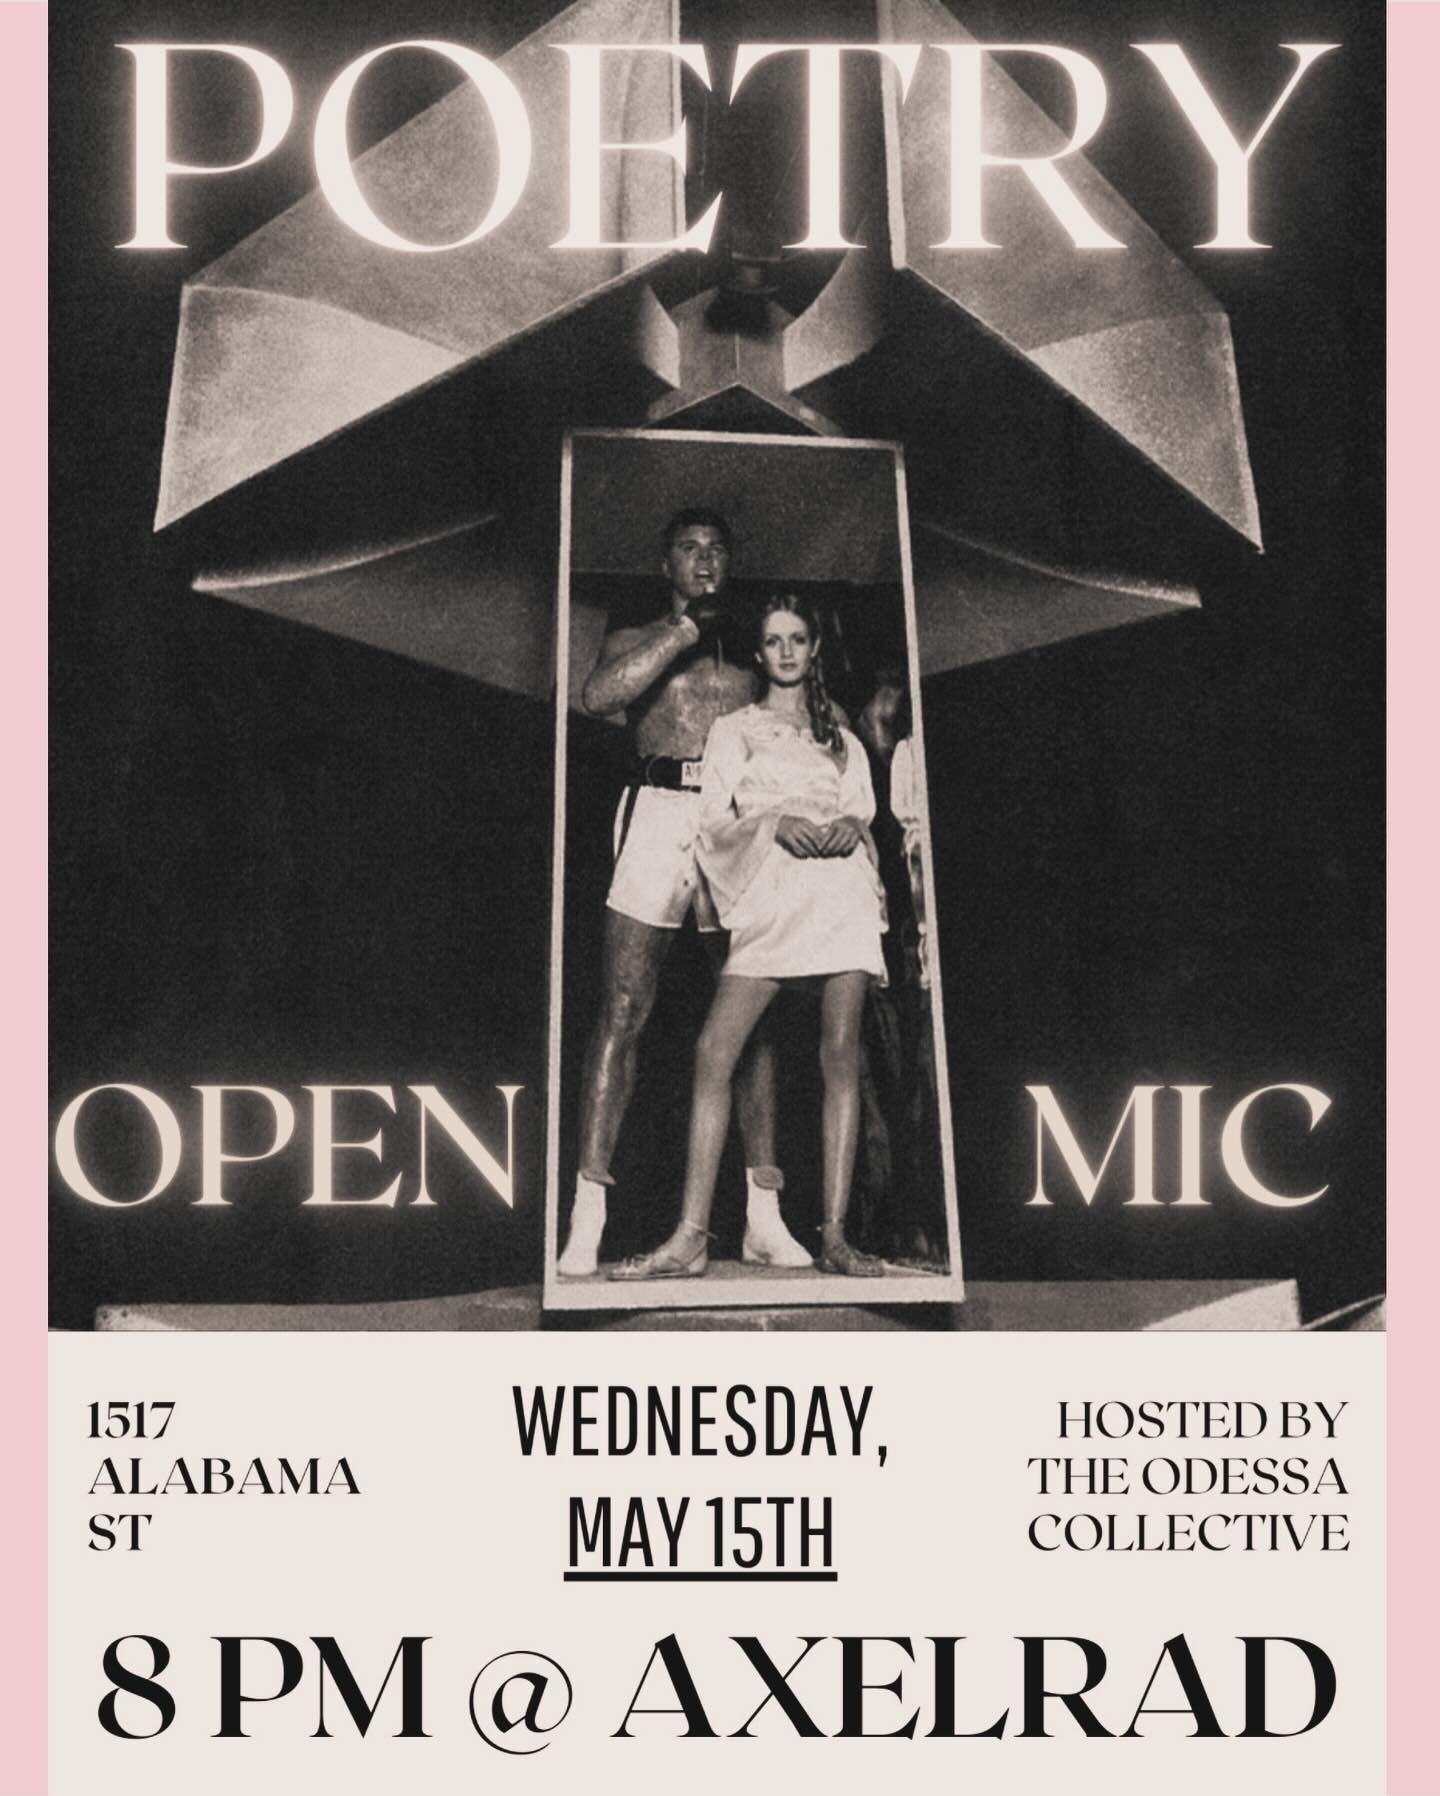 Our open mic, Disconnection Hotline, is back on May 15th 💓 We&rsquo;re at the same place on a new night so save the date! THIRD WEDNESDAYS OF EVERY MONTH

As always, sign up is on the spot and @highpriestsalive will be hosting ✨

OPEN MIC POETRY 
HO